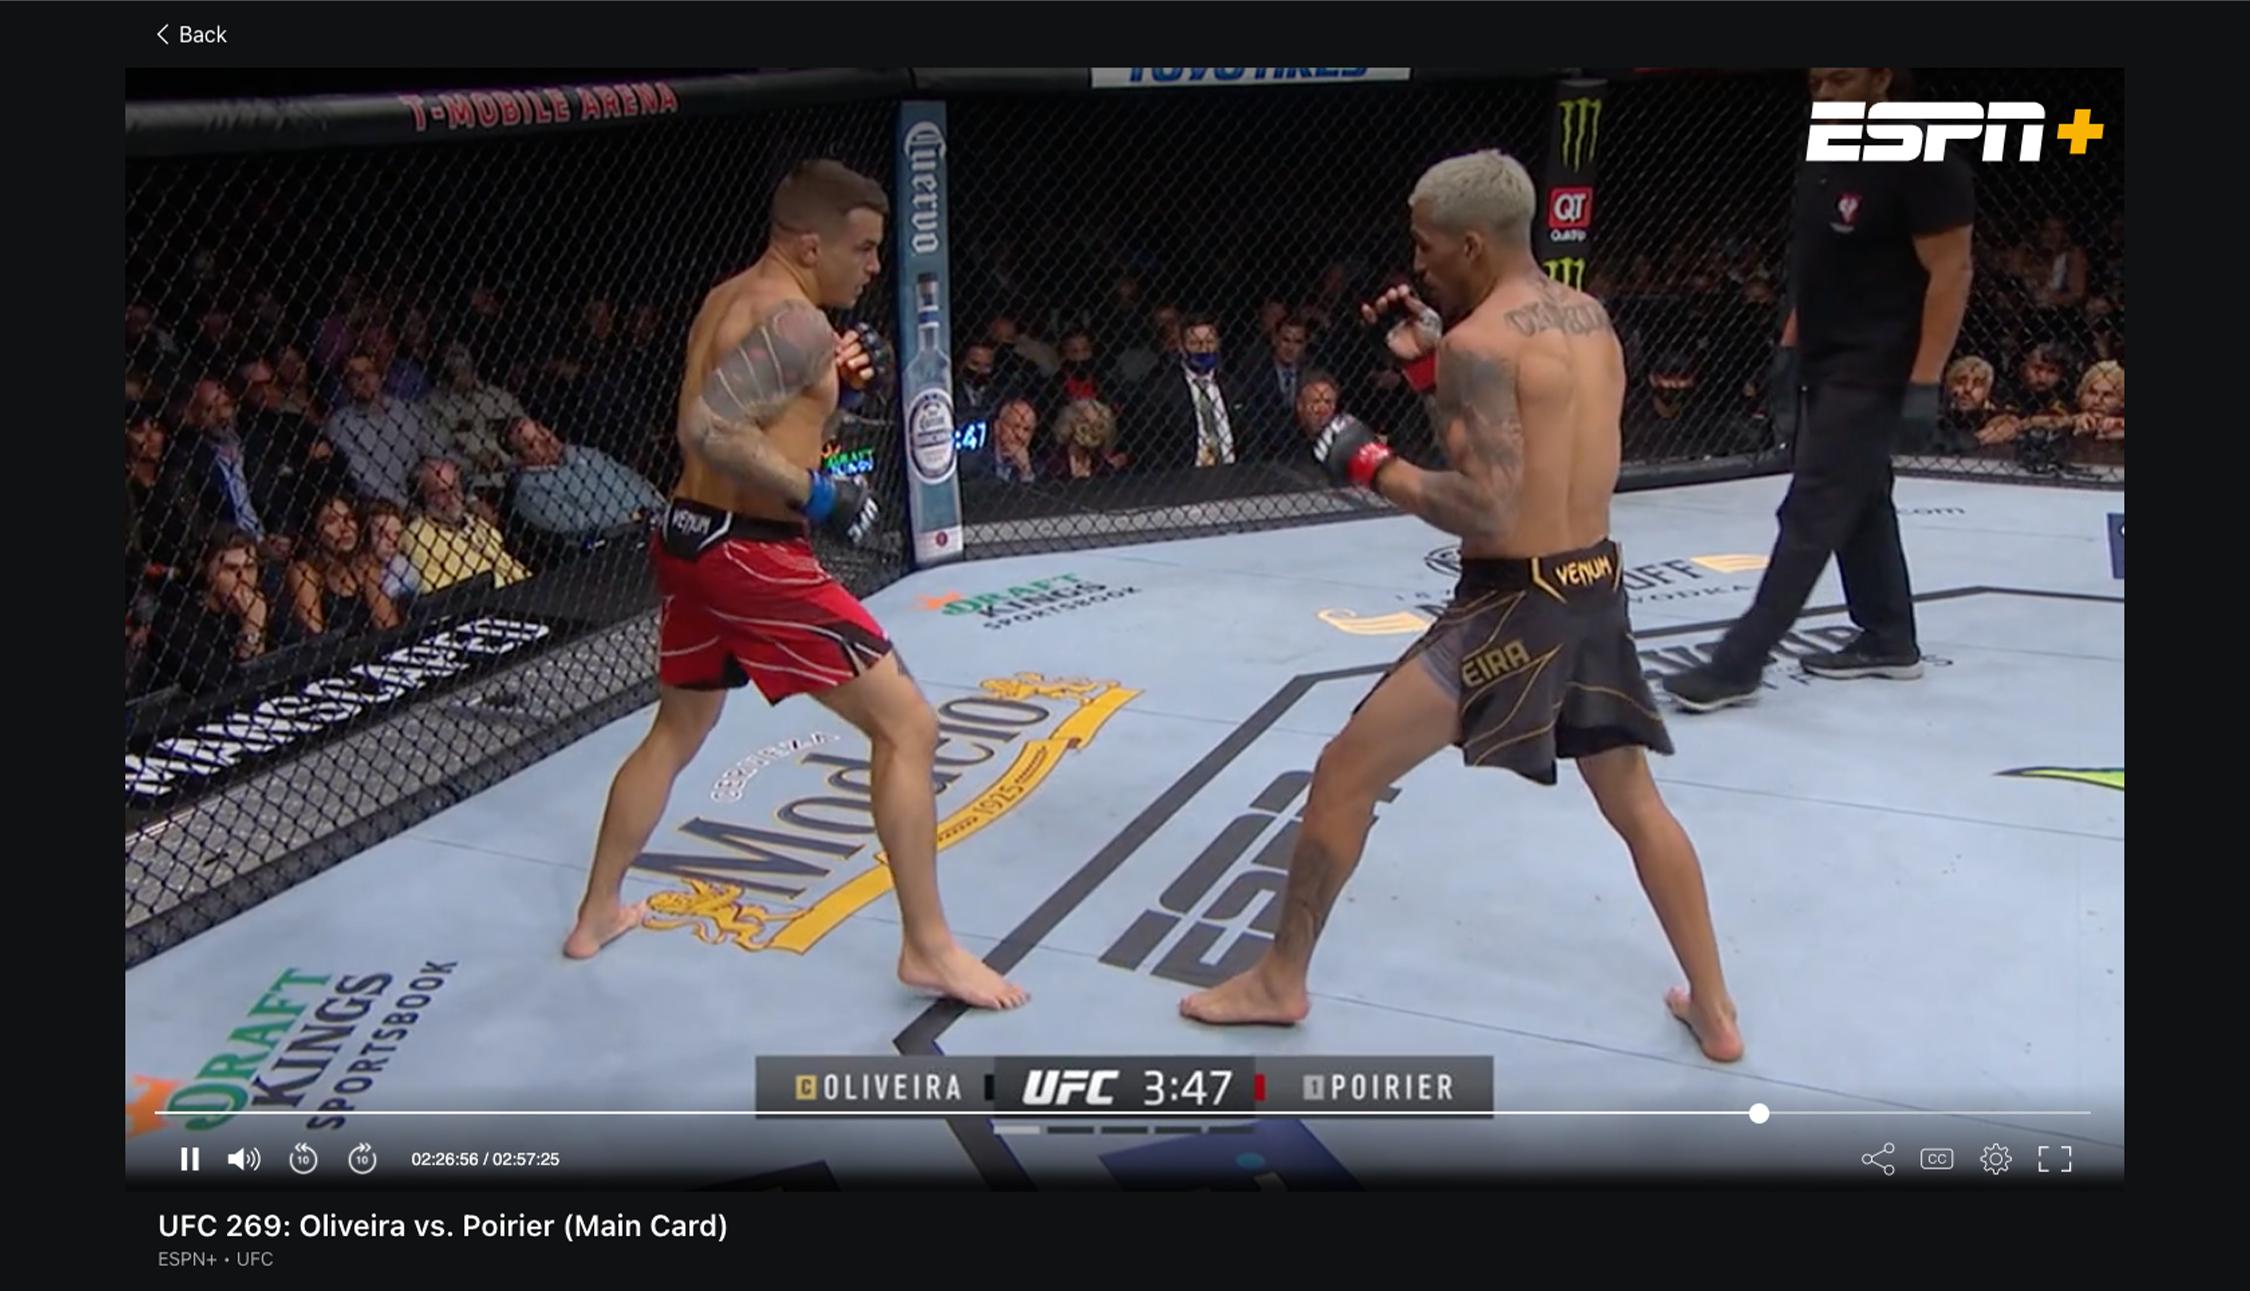 A screenshot of the ESPN Plus media player showing fighters Charles Oliveria and Dustin Poirier facing off in the UFC Octagon.